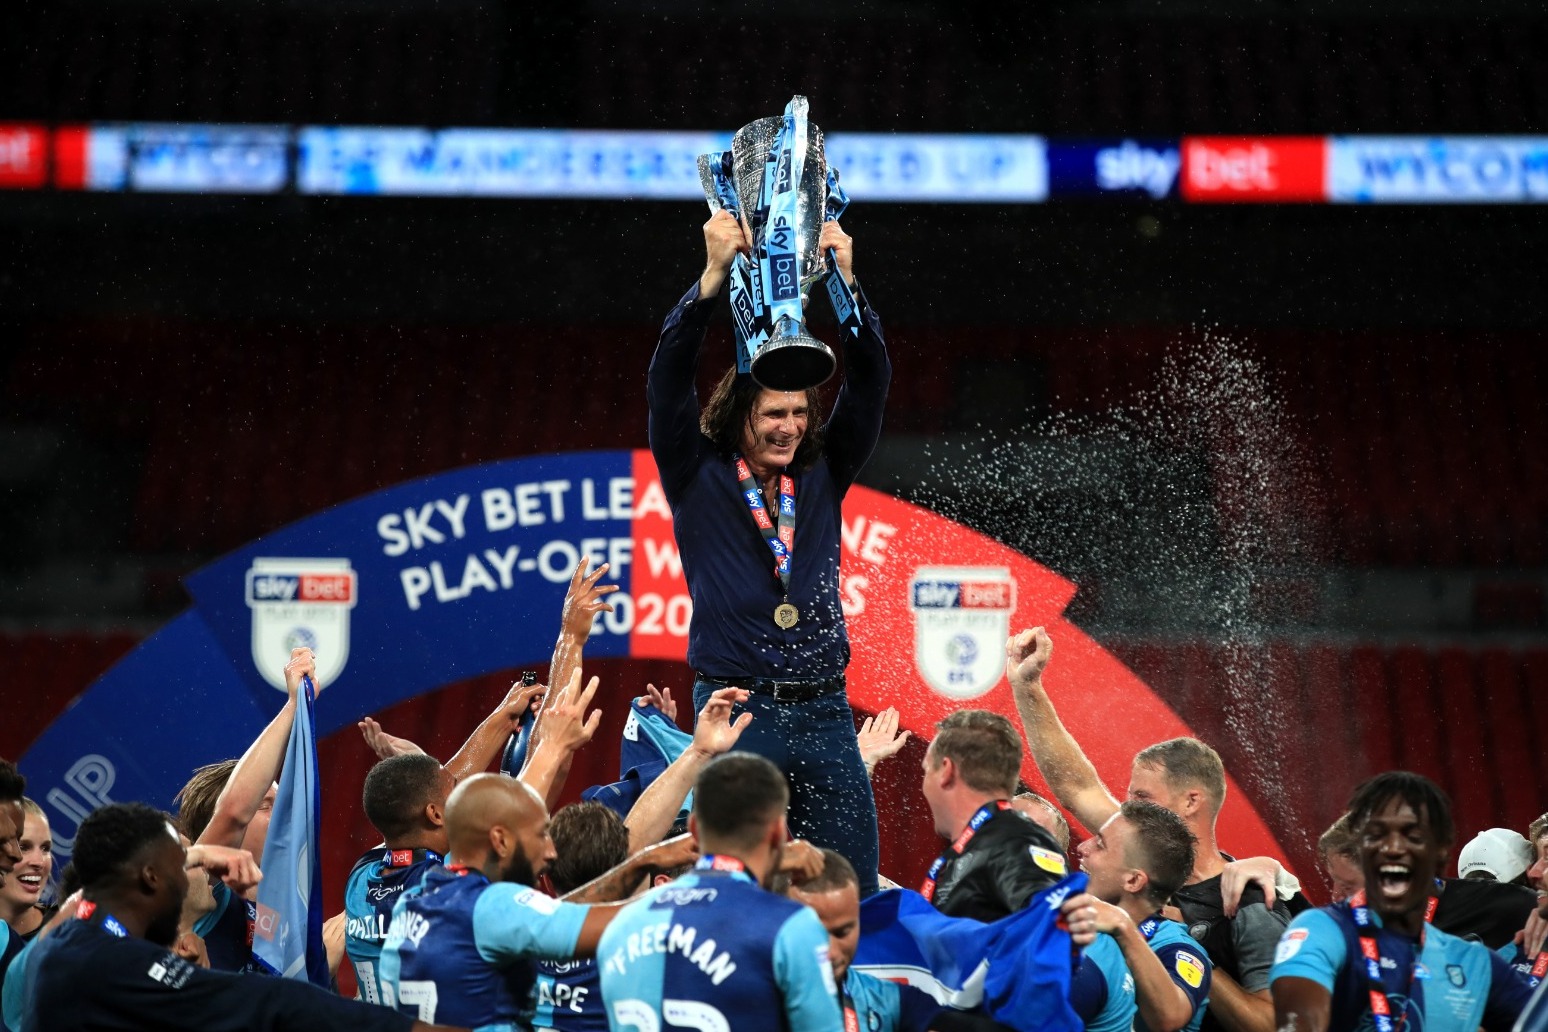 Wycombe Wanderers win promotion to Championship 